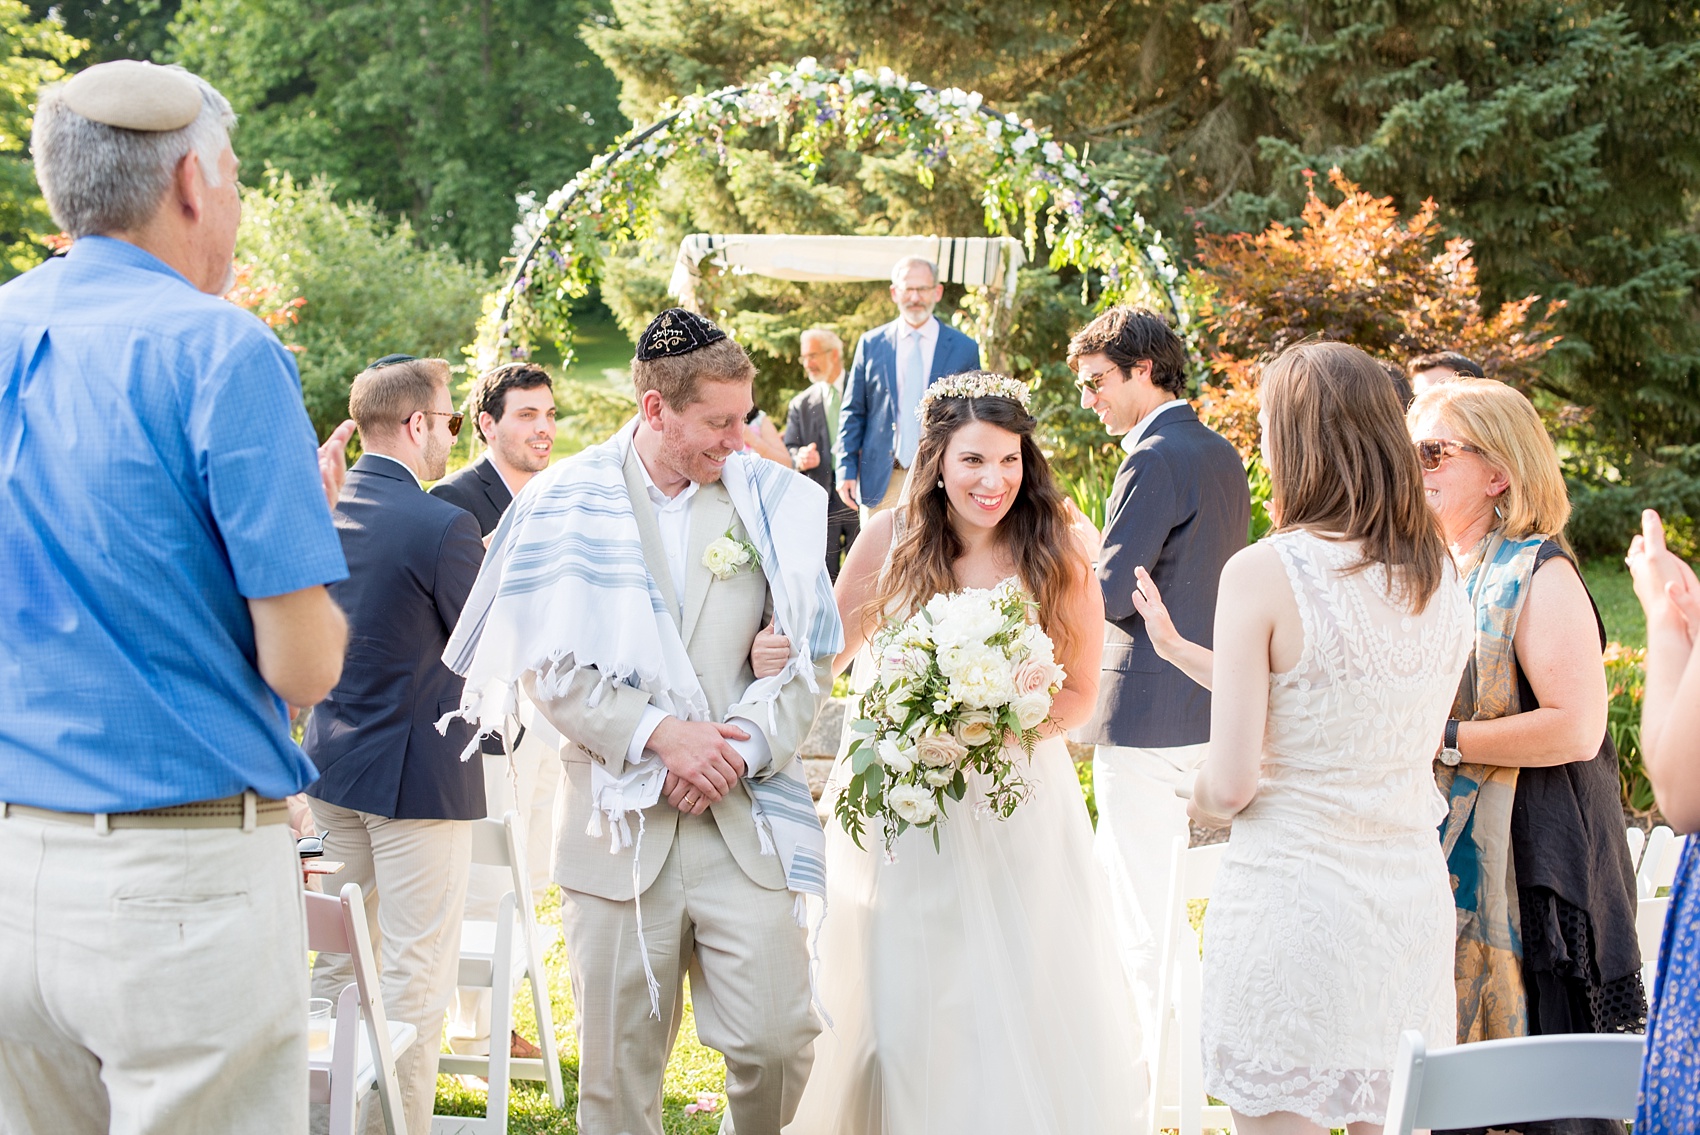 Mikkel Paige Photography photos of a wedding at Spring Hill Manor in Maryland. Image of the outdoor small ceremony.